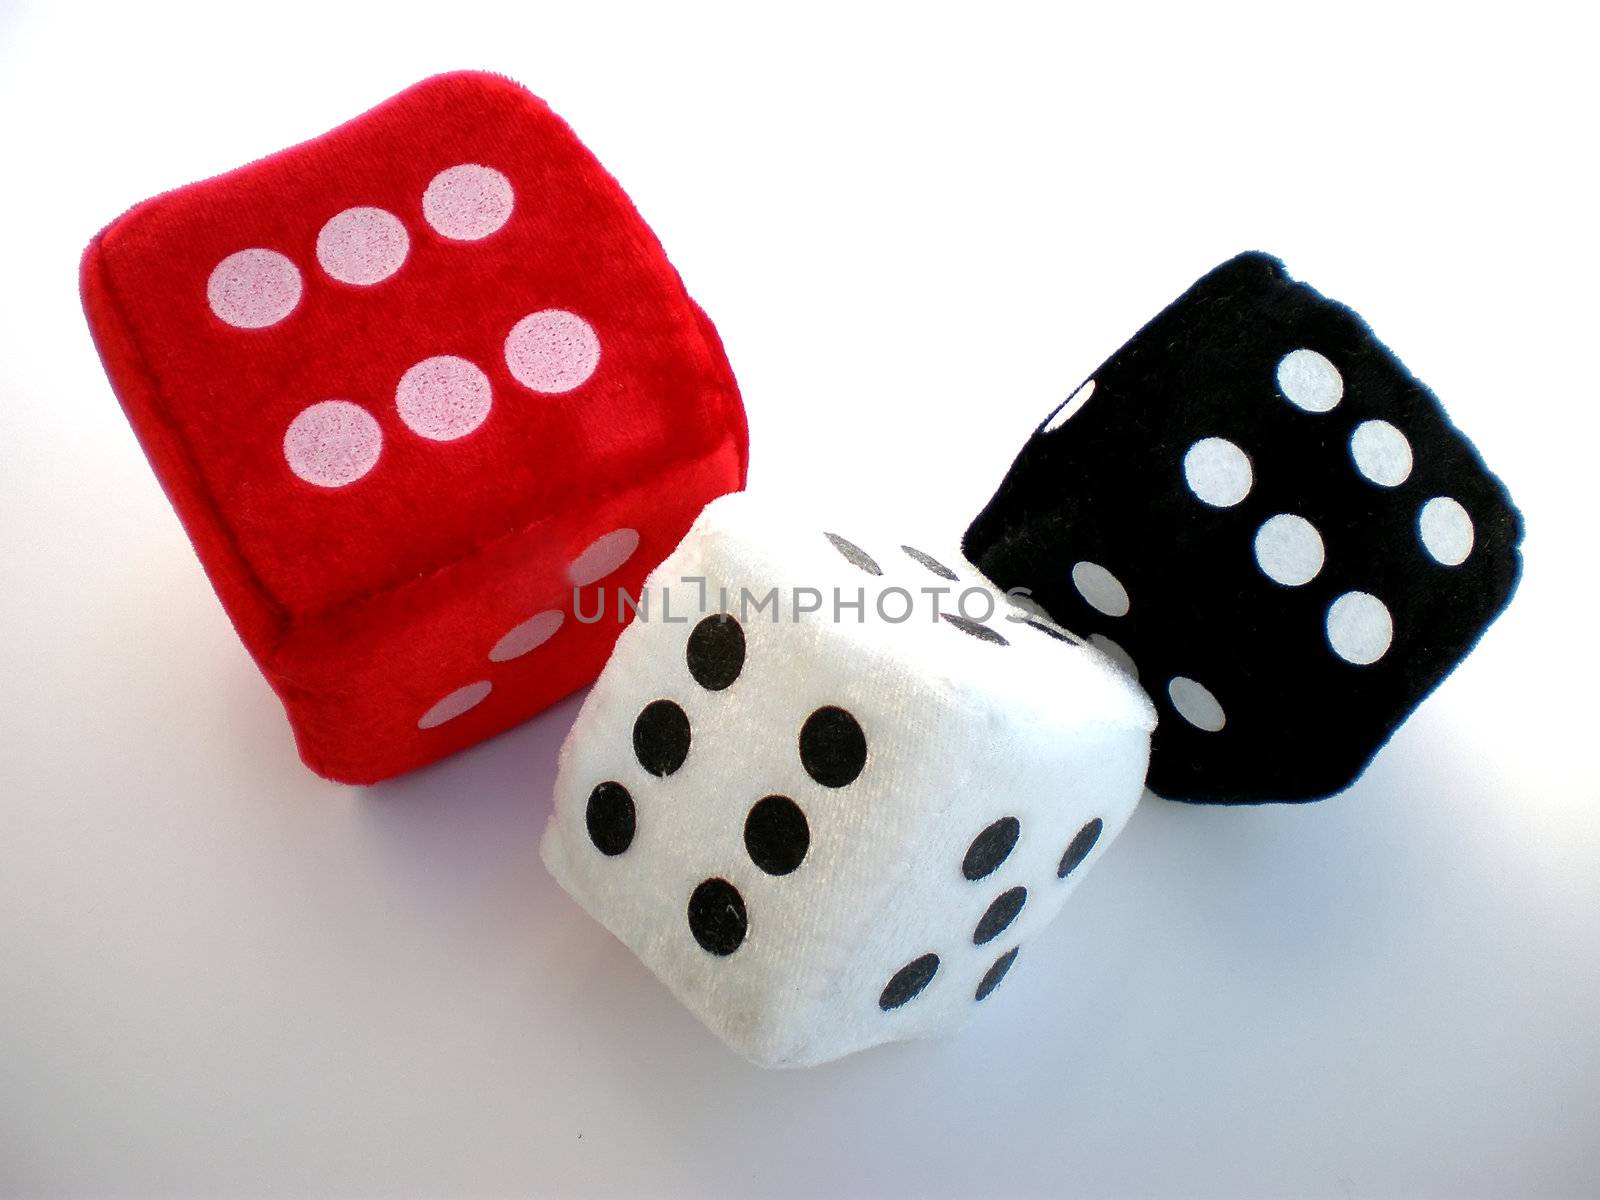 red, white and black dice isolated on white background